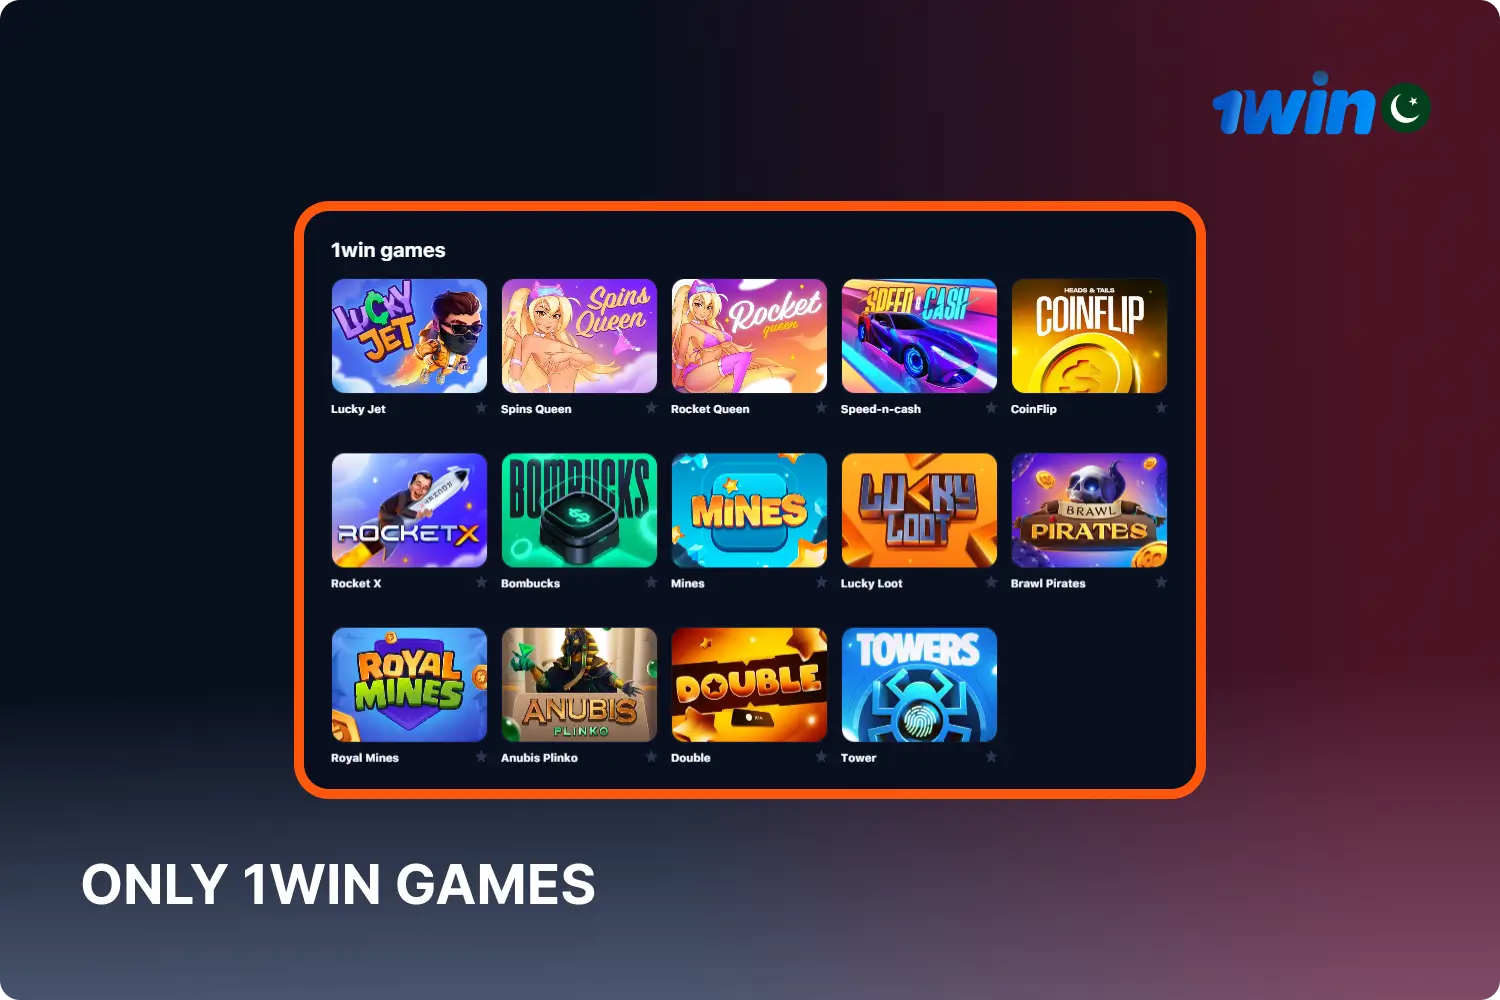 Exclusive games of the 1win platform are presented in a separate section Only 1win games